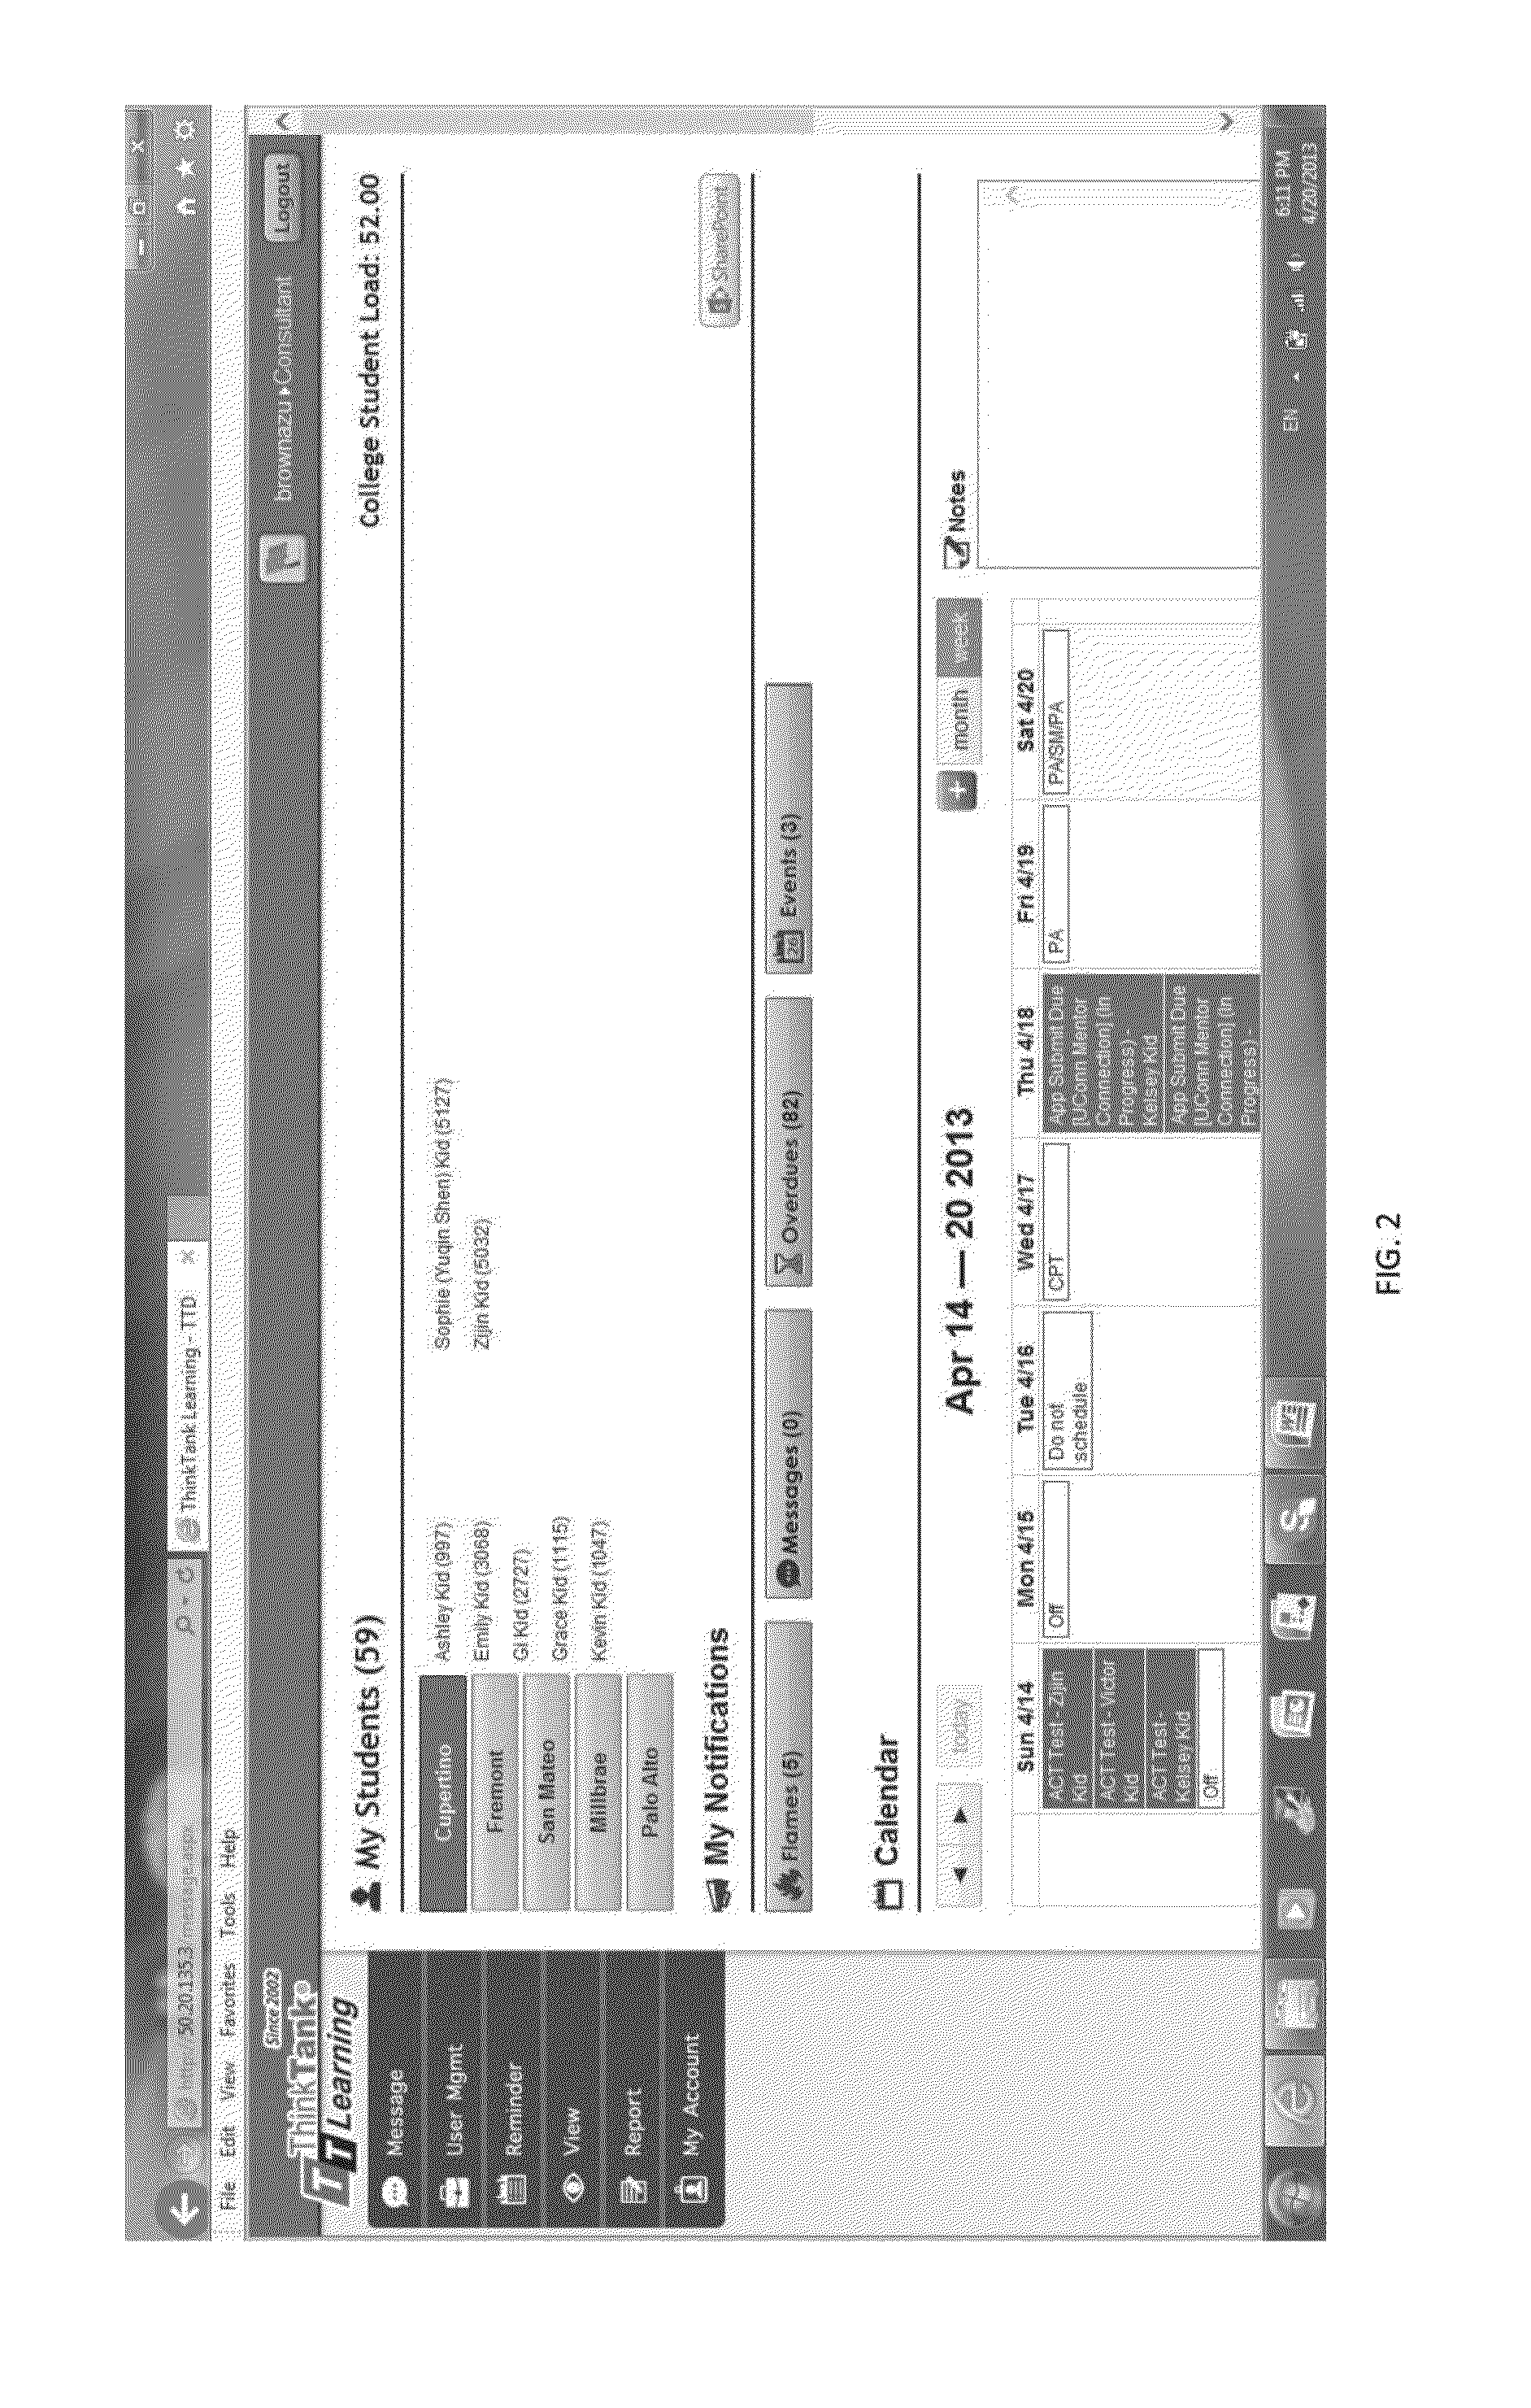 Individualized education consulting system and method